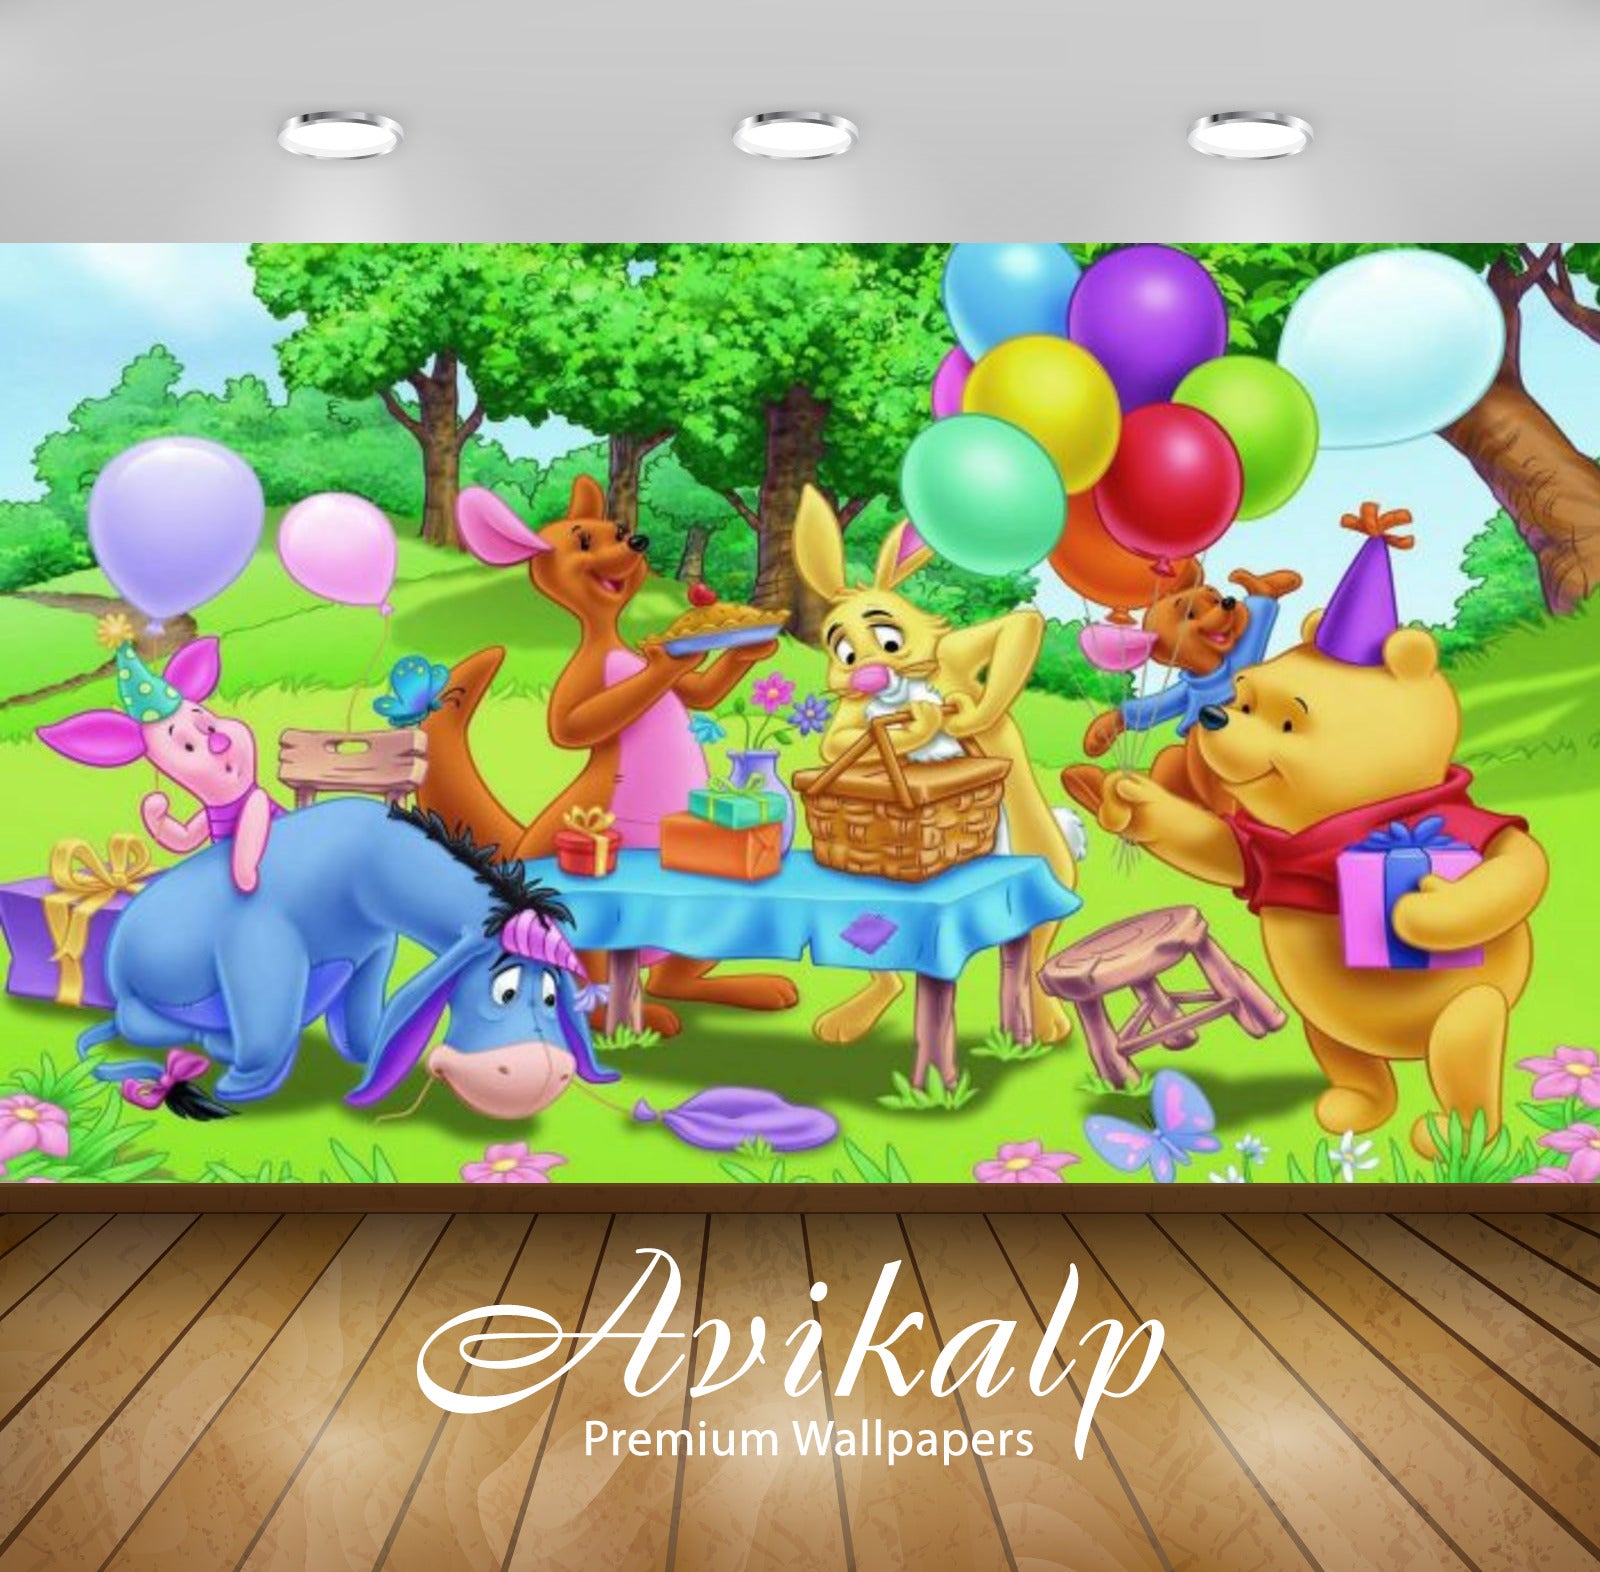 Avikalp Exclusive Awi2444 Birthday Party Winnie The Pooh And Friends Gifts Balloons Full HD Wallpape